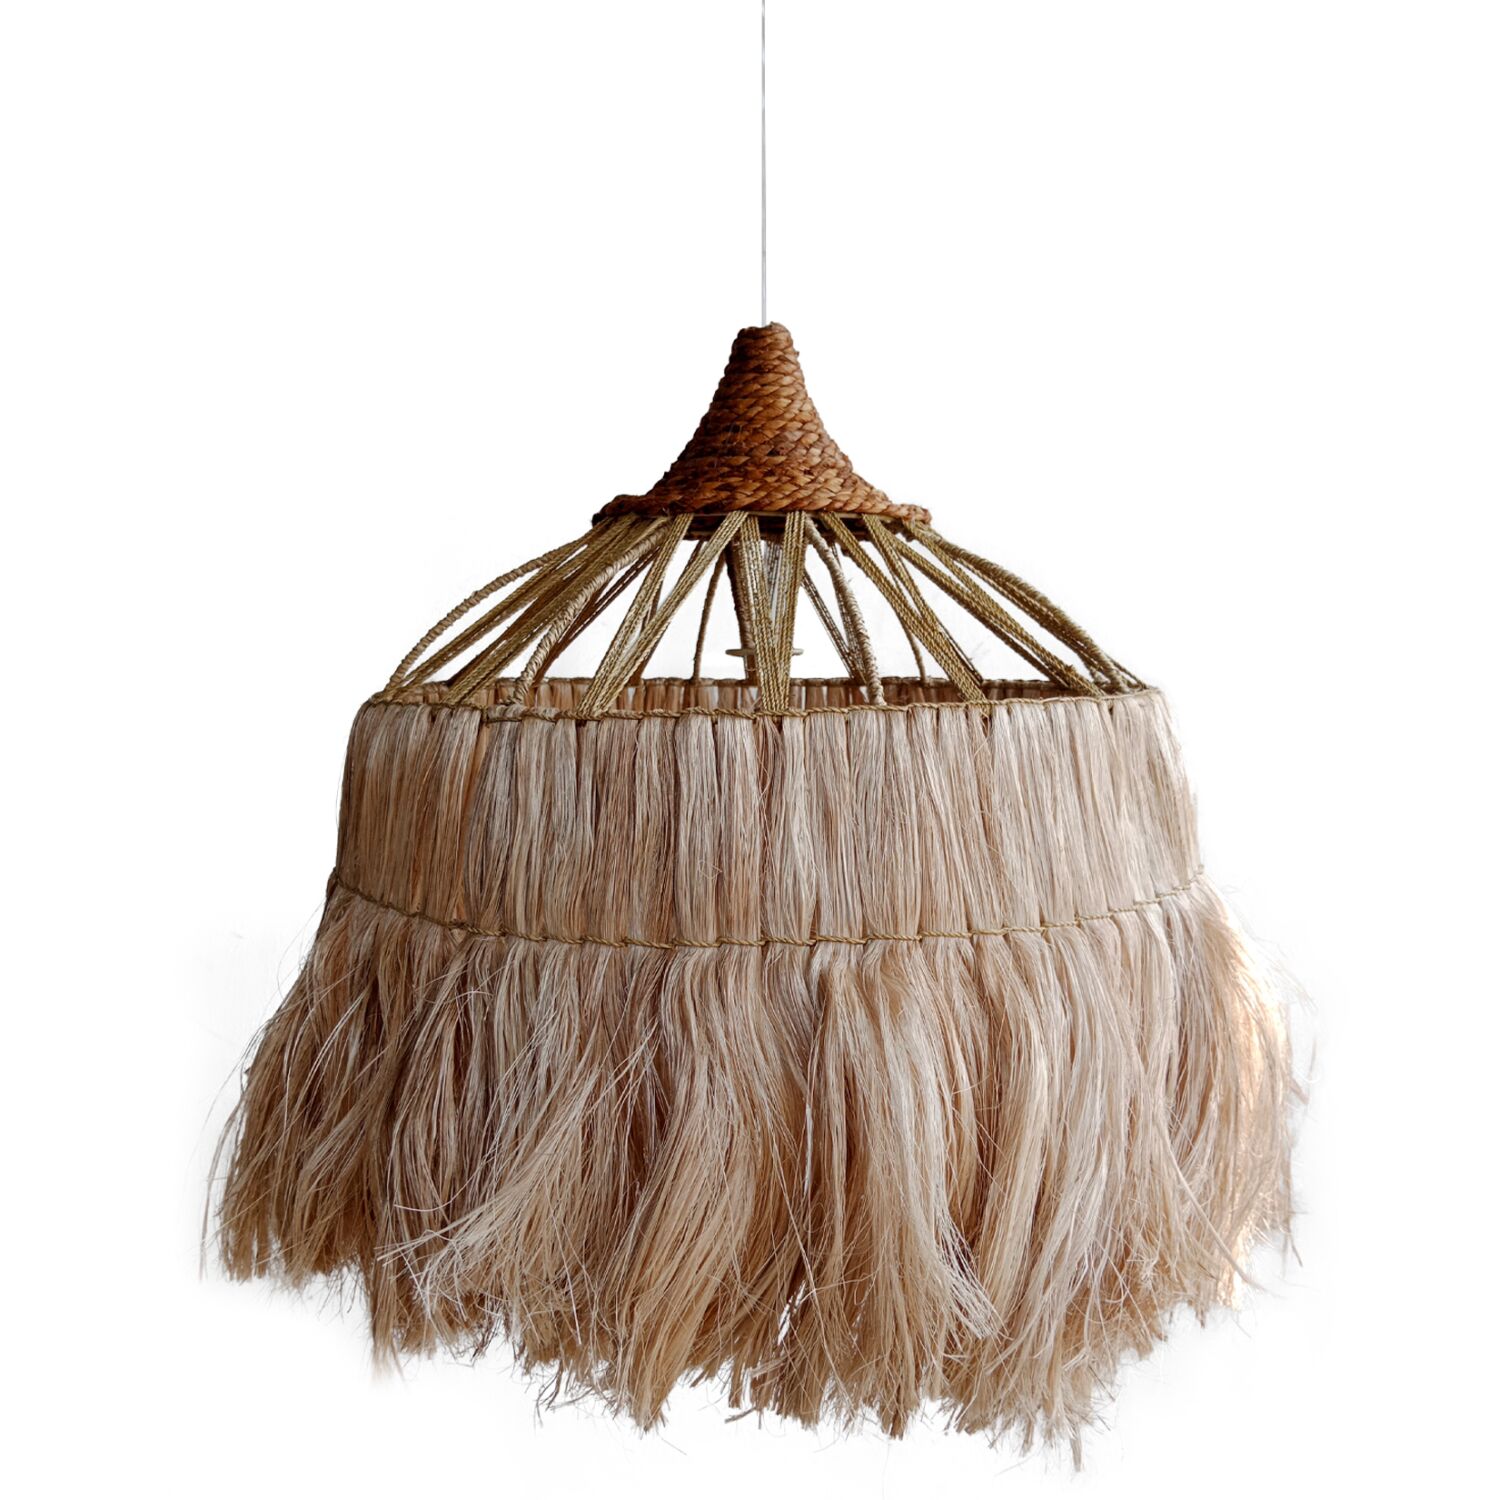 CEILING PENDANT WITH CYLINDRICAL CAP ABACA FIBERS IN NATURAL 50x50x50Hcm.HM7764